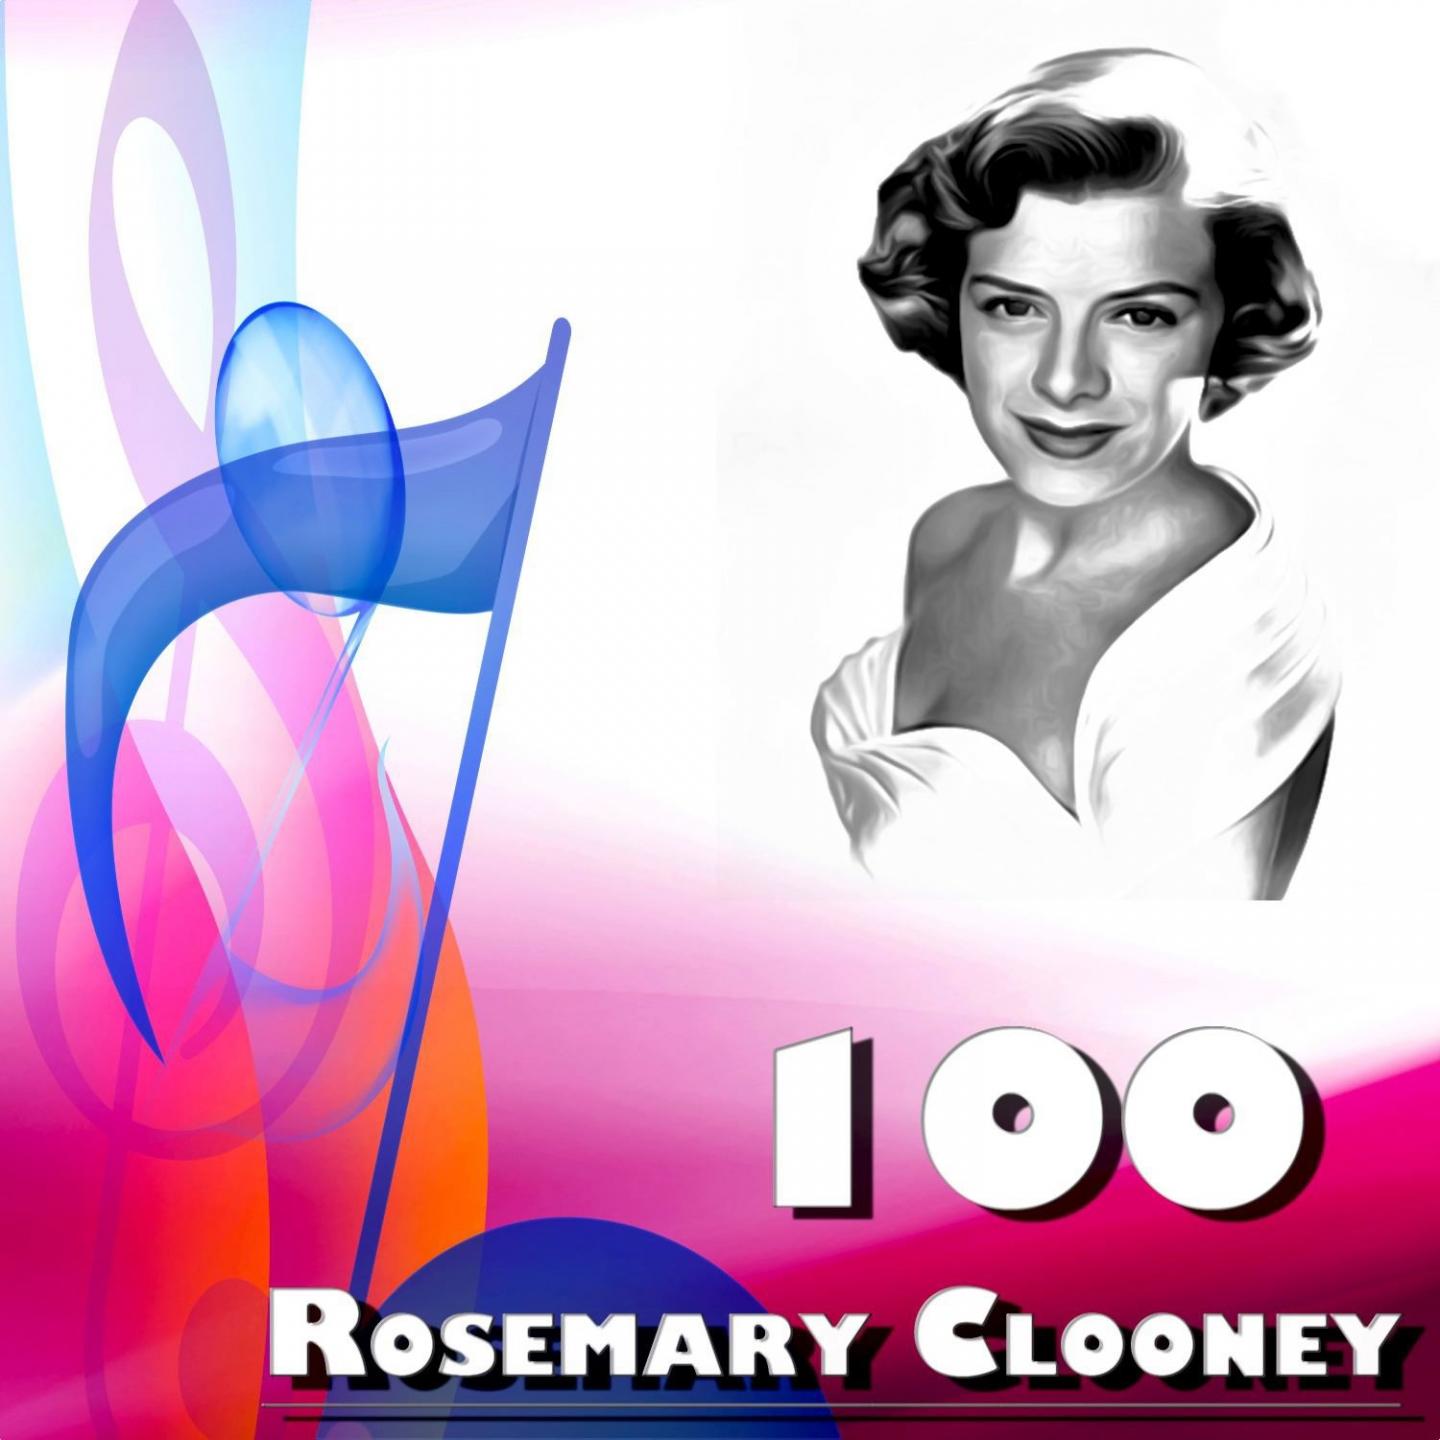 It Don't Mean a Thing (If It Ain't Got That Swing) (Rosemary Clooney with Duke Ellington & His Orchestra)